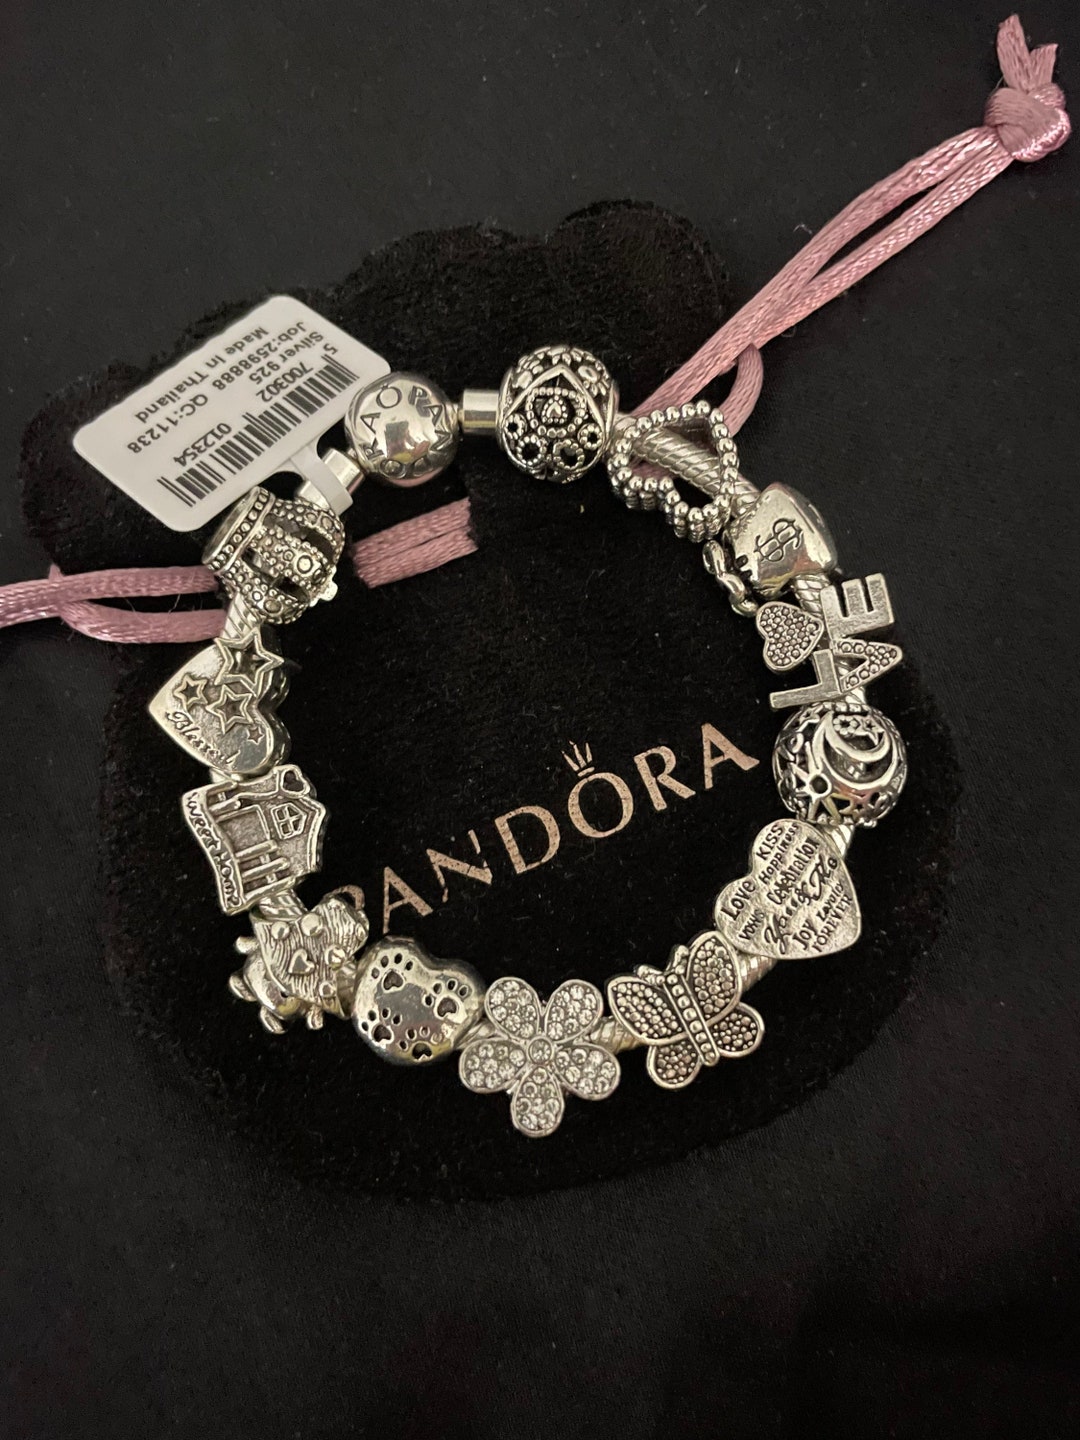 Pandora Bracelet With Silver Themed Charms - Etsy